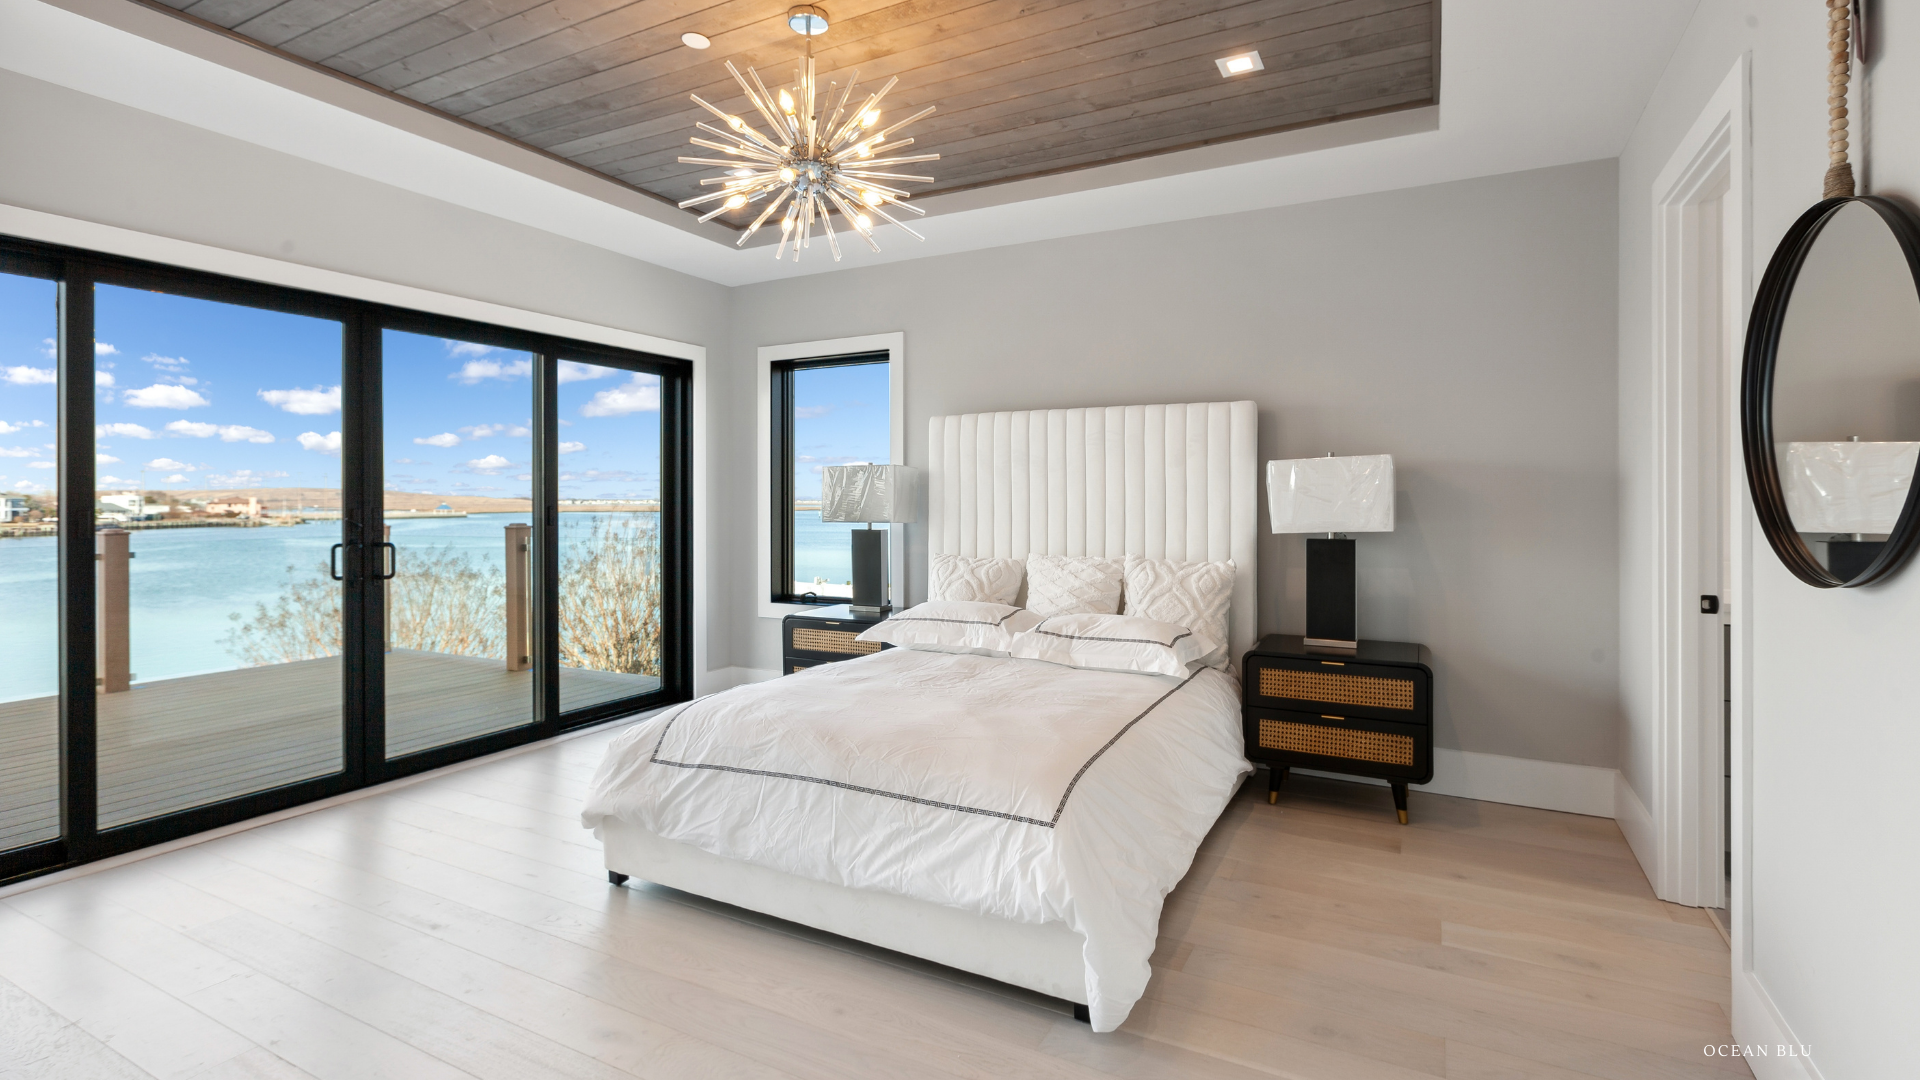 Ocean Blu Interior Designers Waterfront, NY Long Island Home Project Long Beach, New Construction